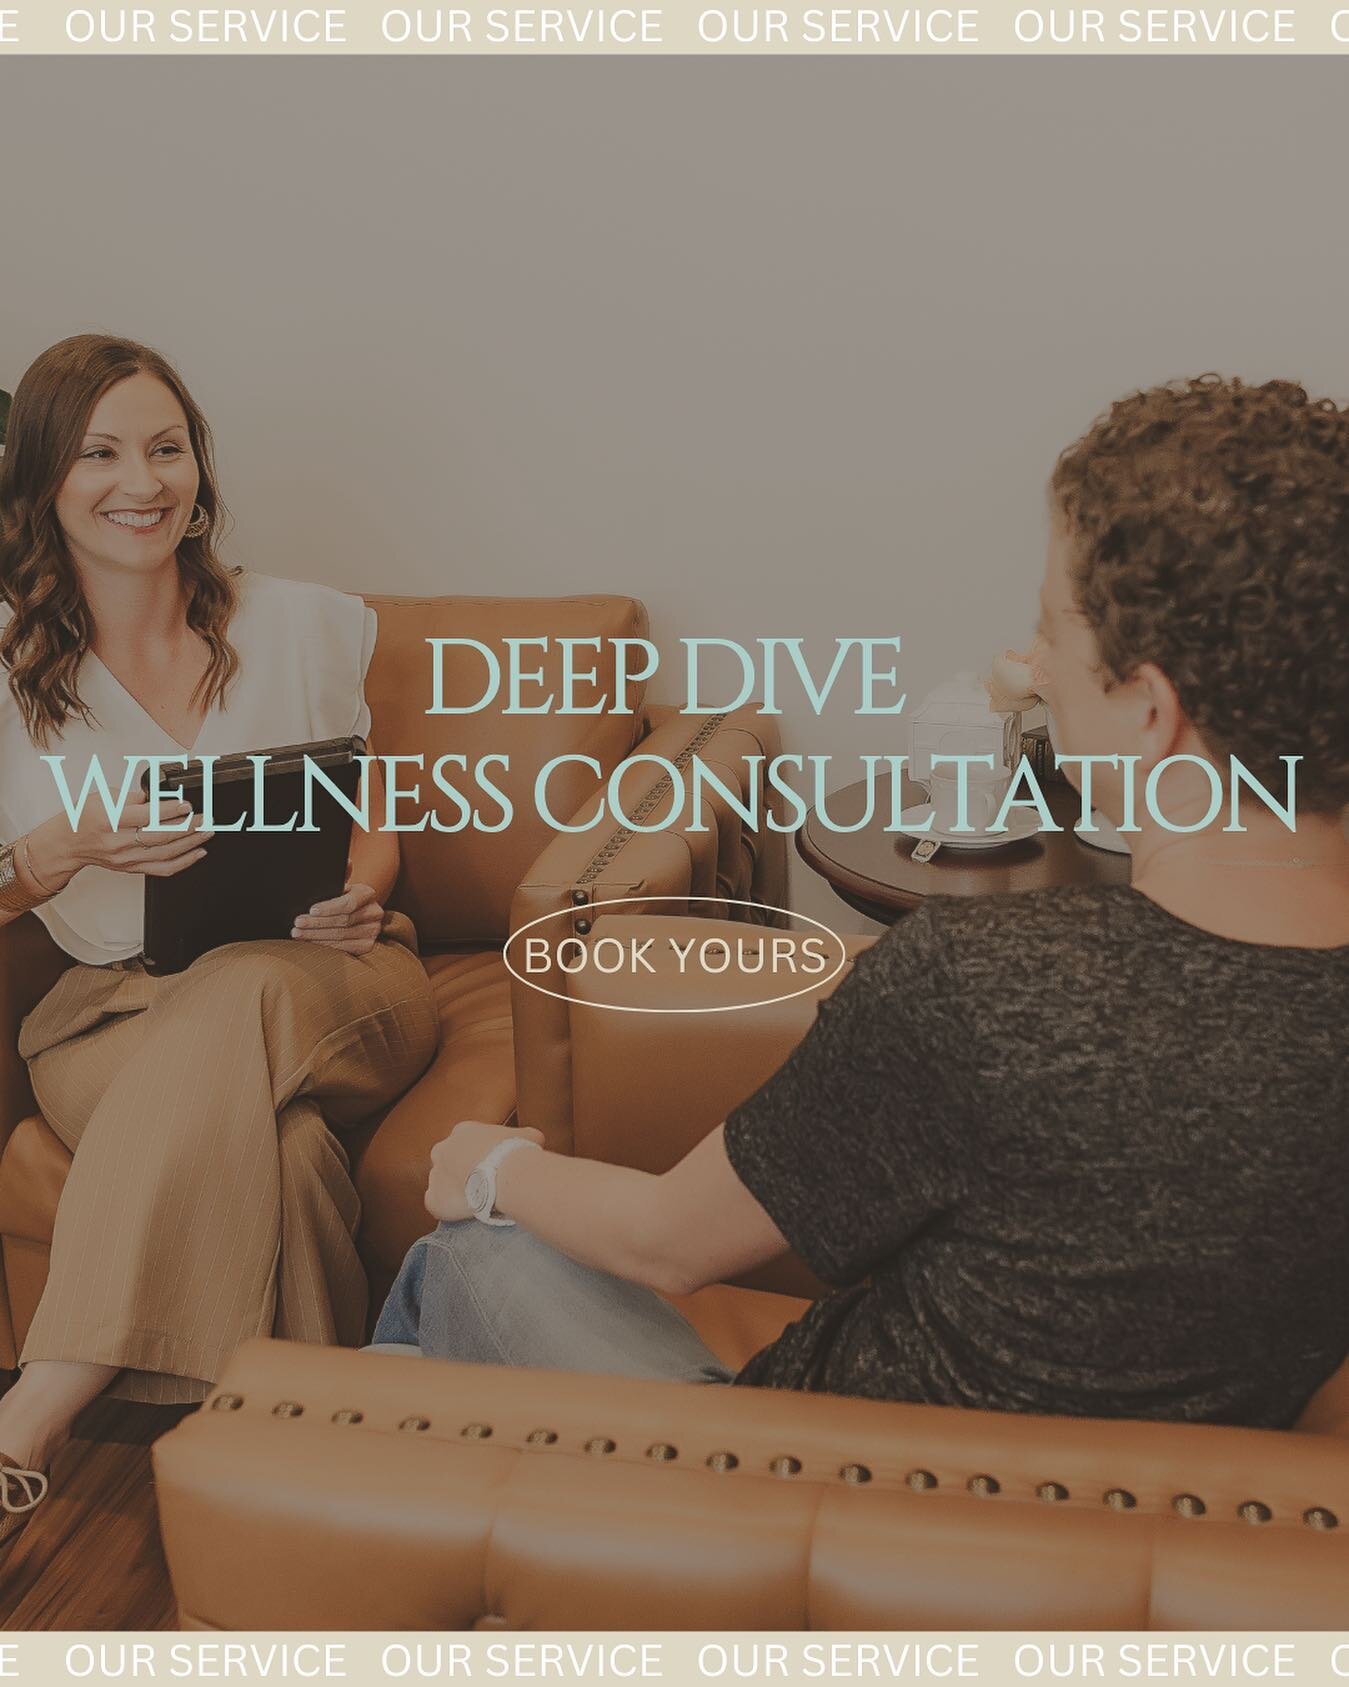 Diving deep into wellness with a personalized touch! 🌿

Our Deep Dive Wellness Consultation is all about YOU. Our team reviews your questionnaires and dedicates an hour to craft a customized plan to help you reach your wellness goals. 🥰
&nbsp;
Let'